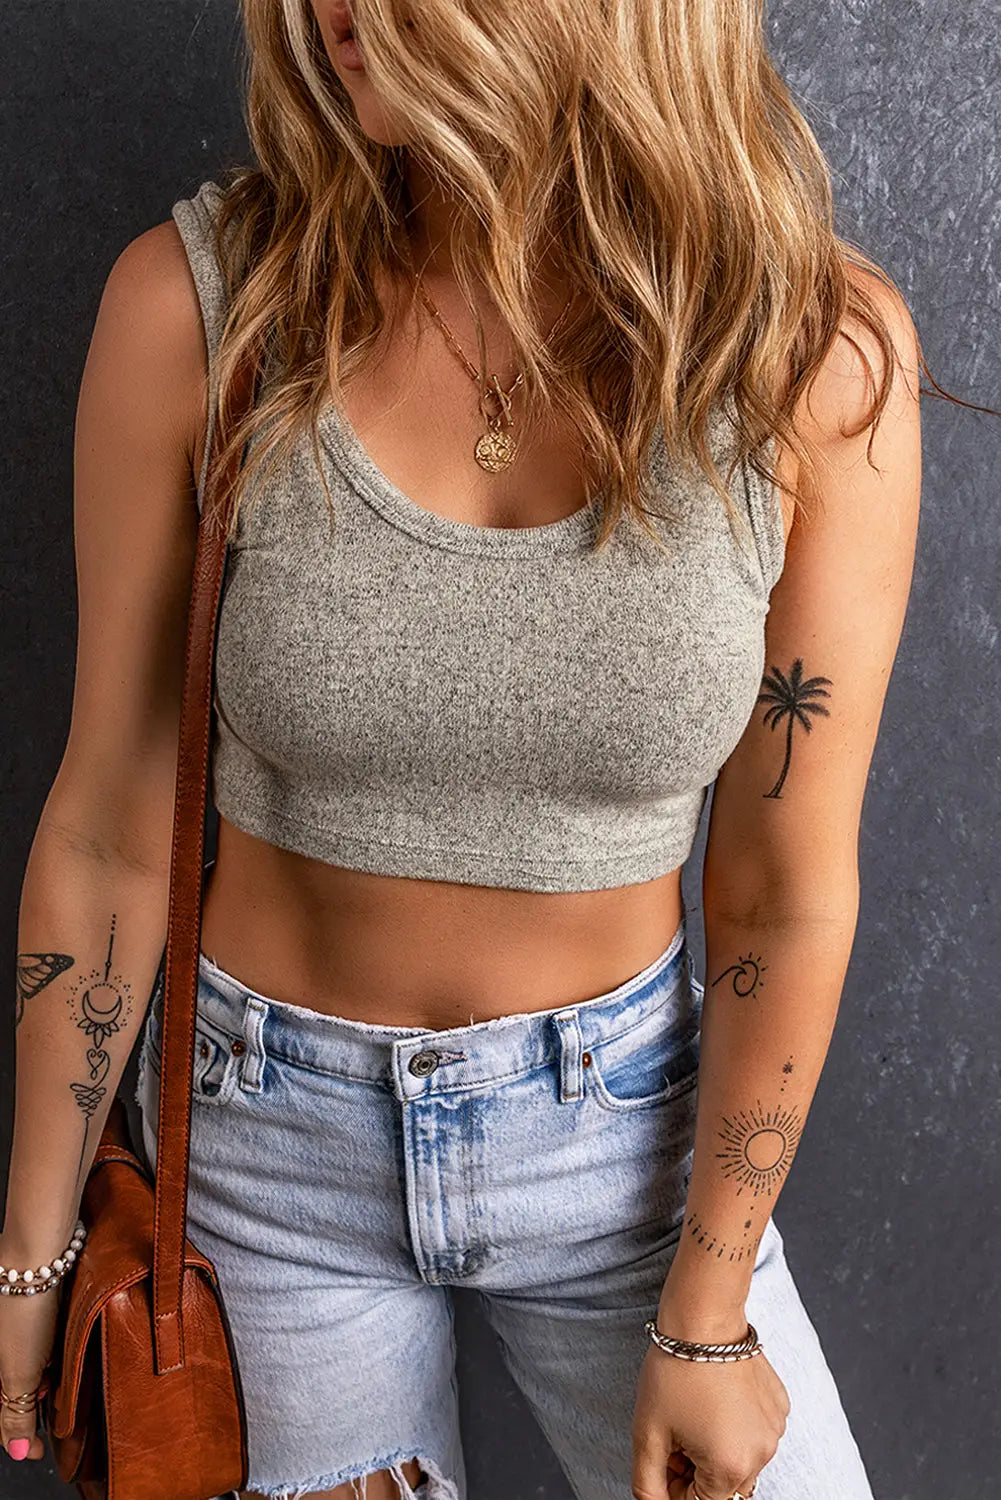 Grey stretchy knit crop top - tops